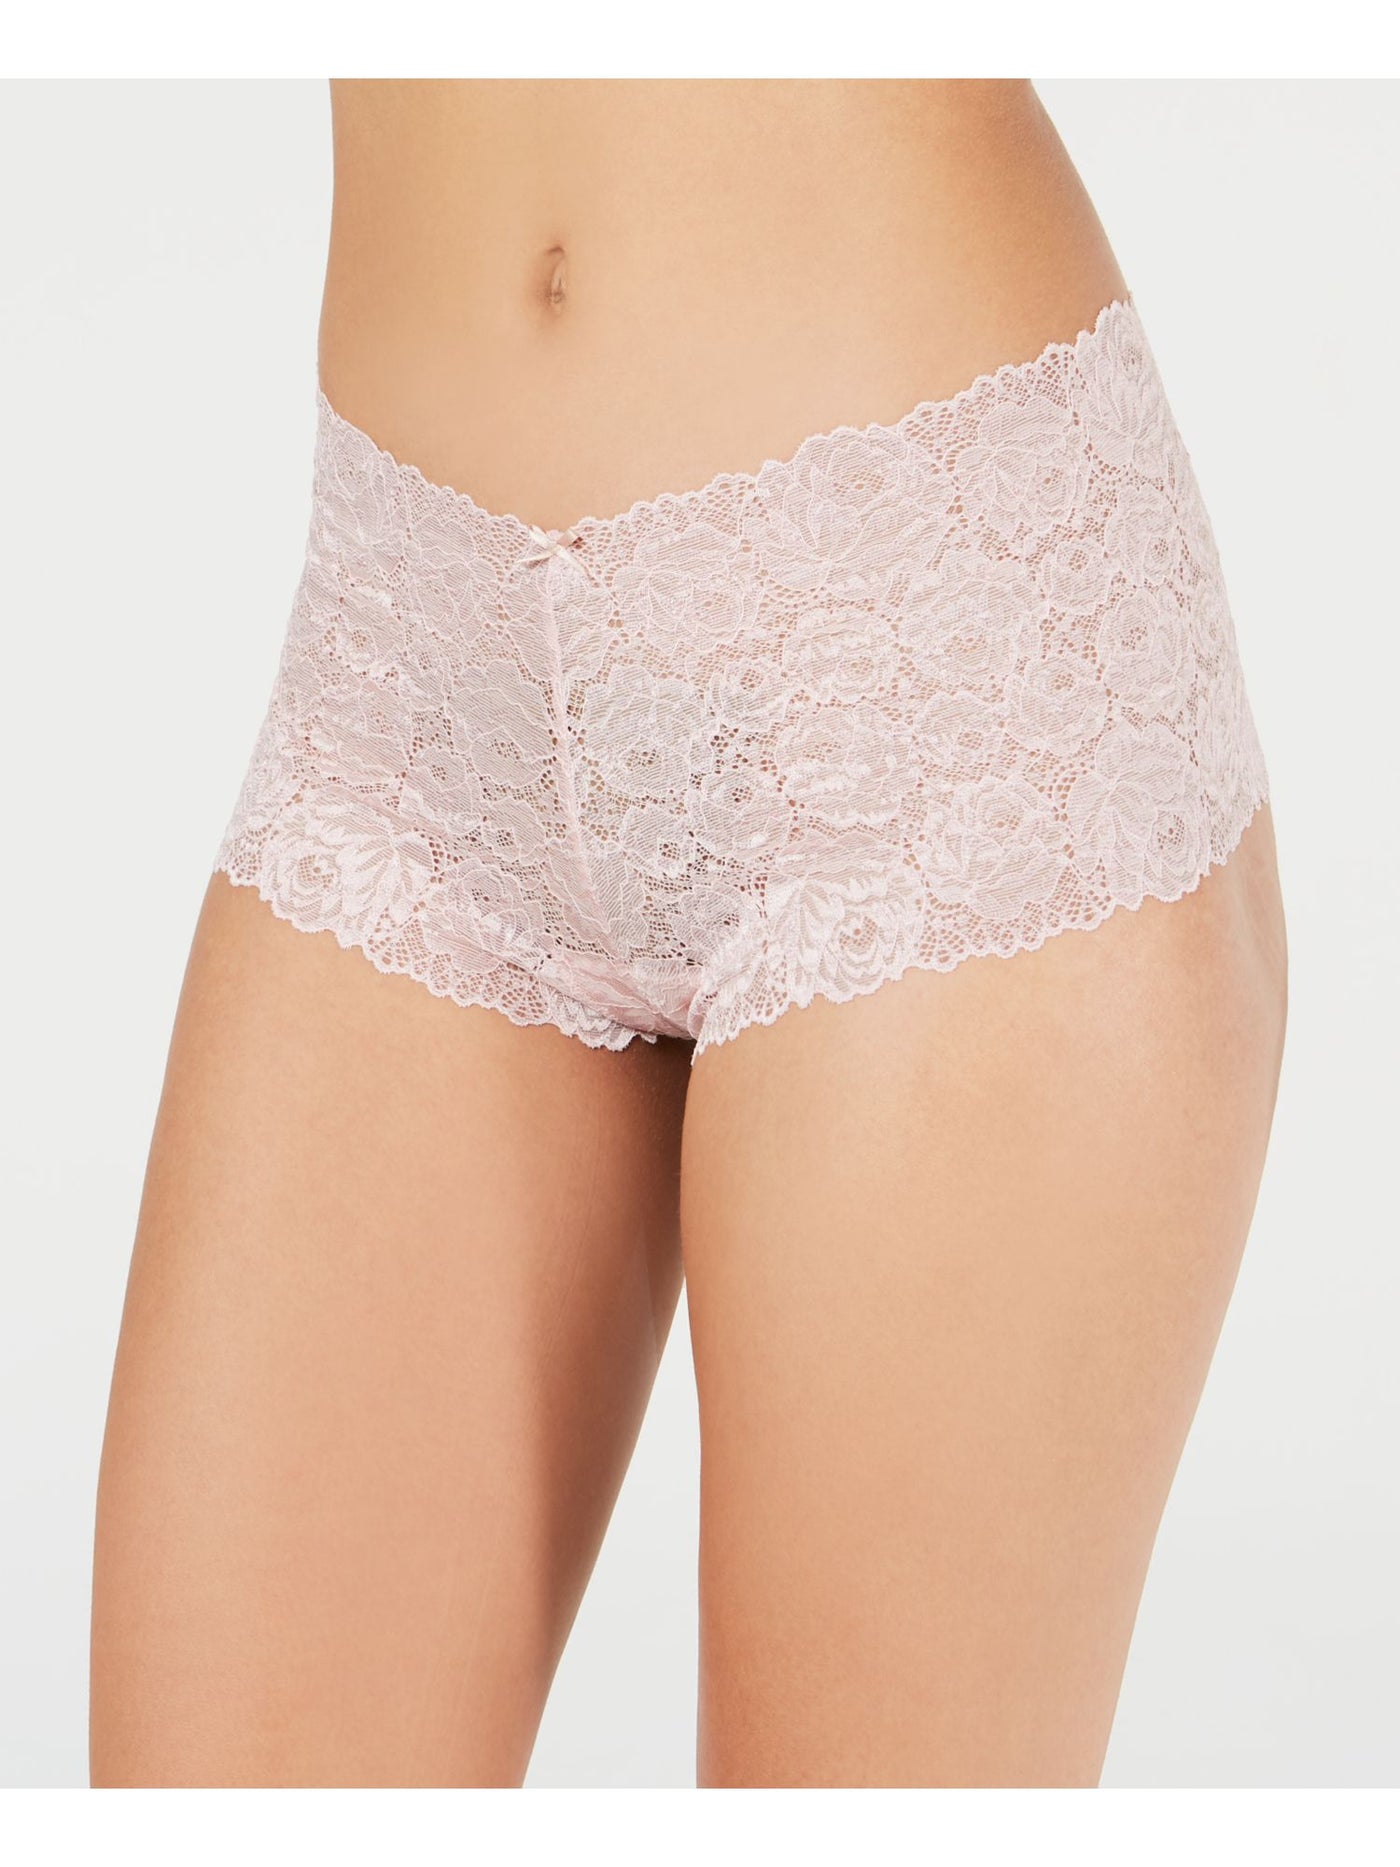 INC Intimates Pink Lace Floral Everyday Boy Short Size: XXL